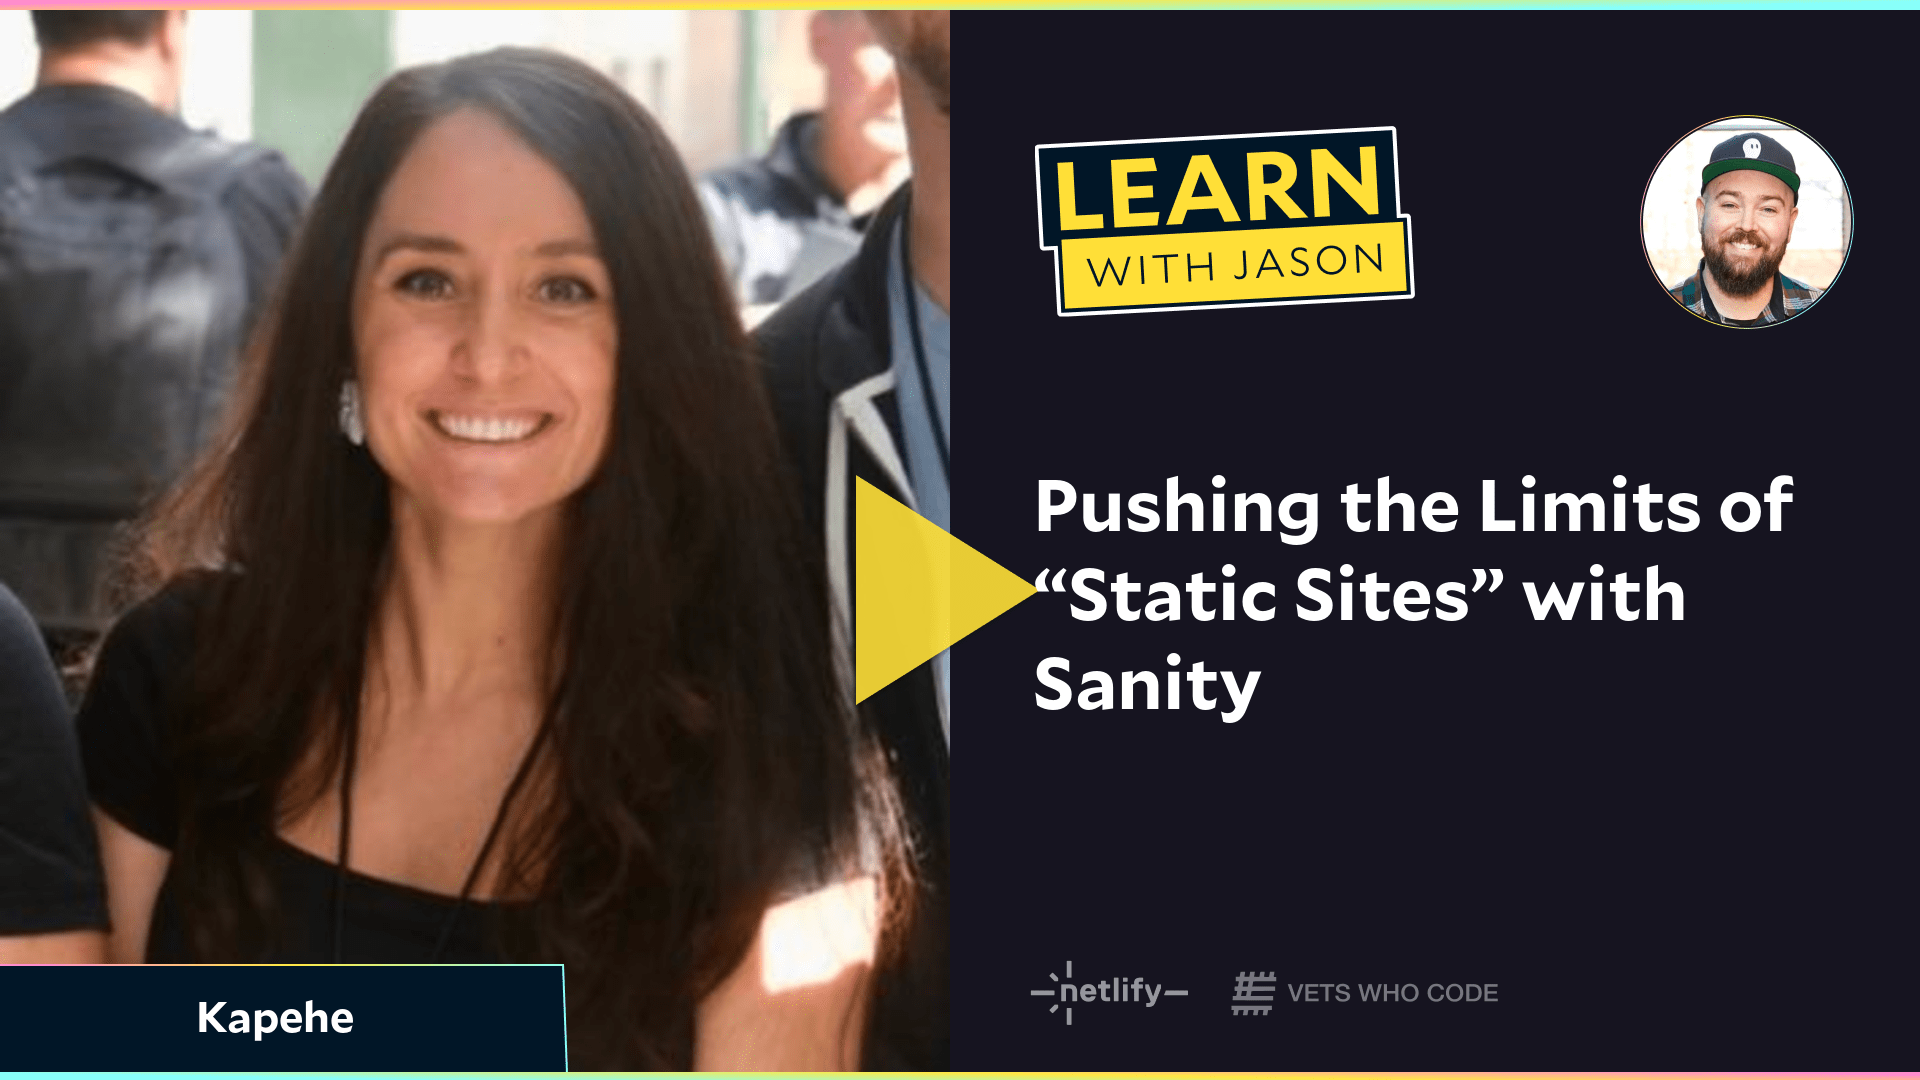 Pushing the Limits of “Static Sites” with Sanity (with Kapehe)